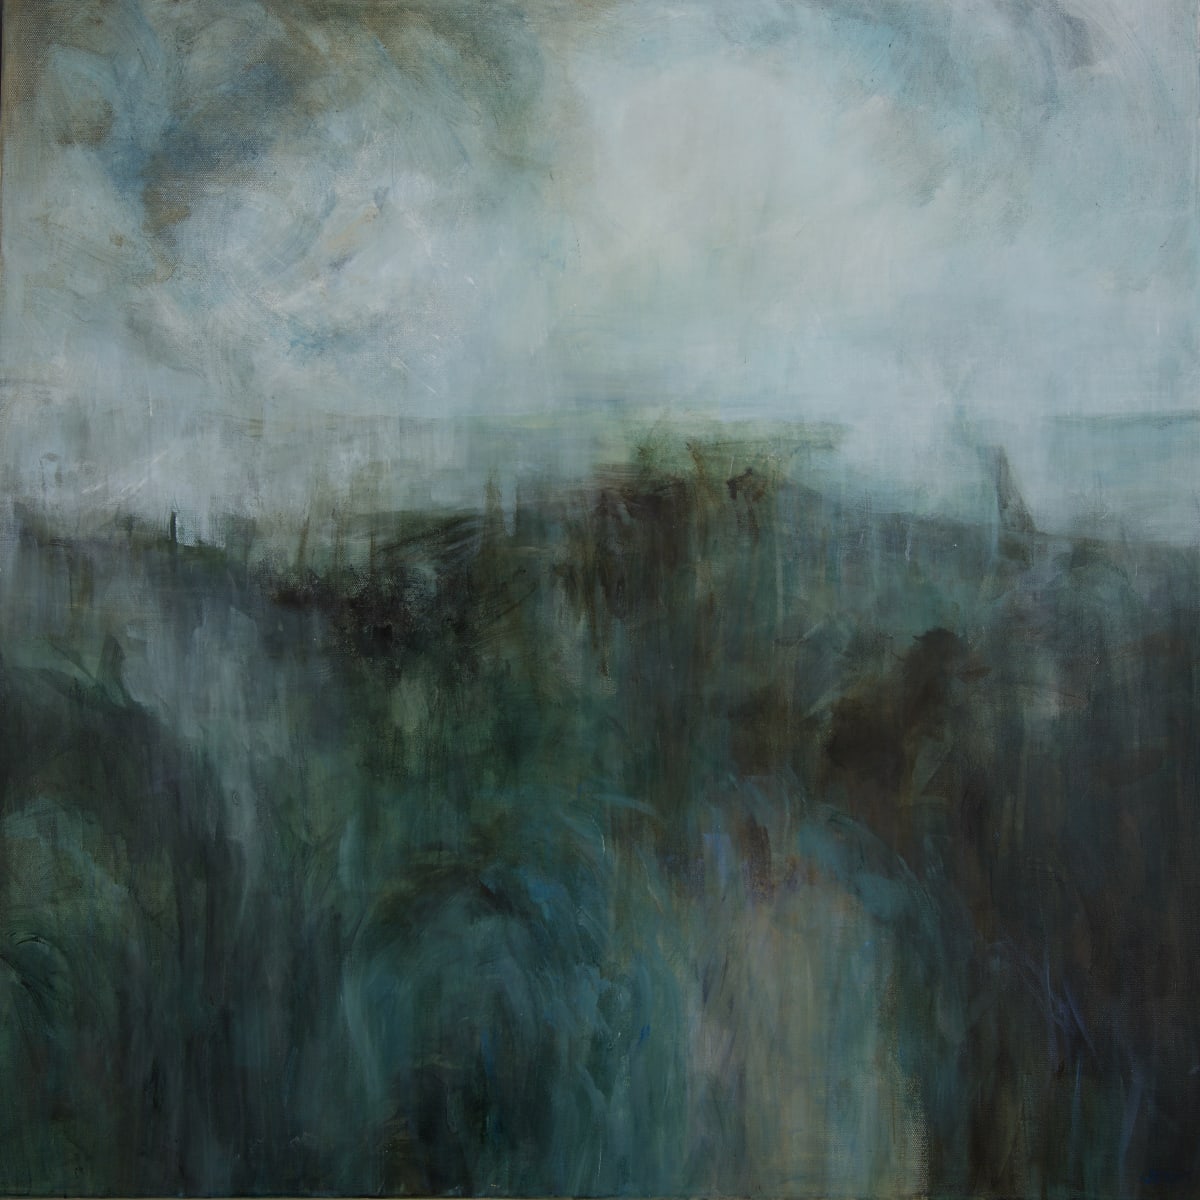 Soliloquy by Jo York  Image: Soliloquy, an atmospheric painting reflecting the calm and intense quiet of a misty morning on the moor